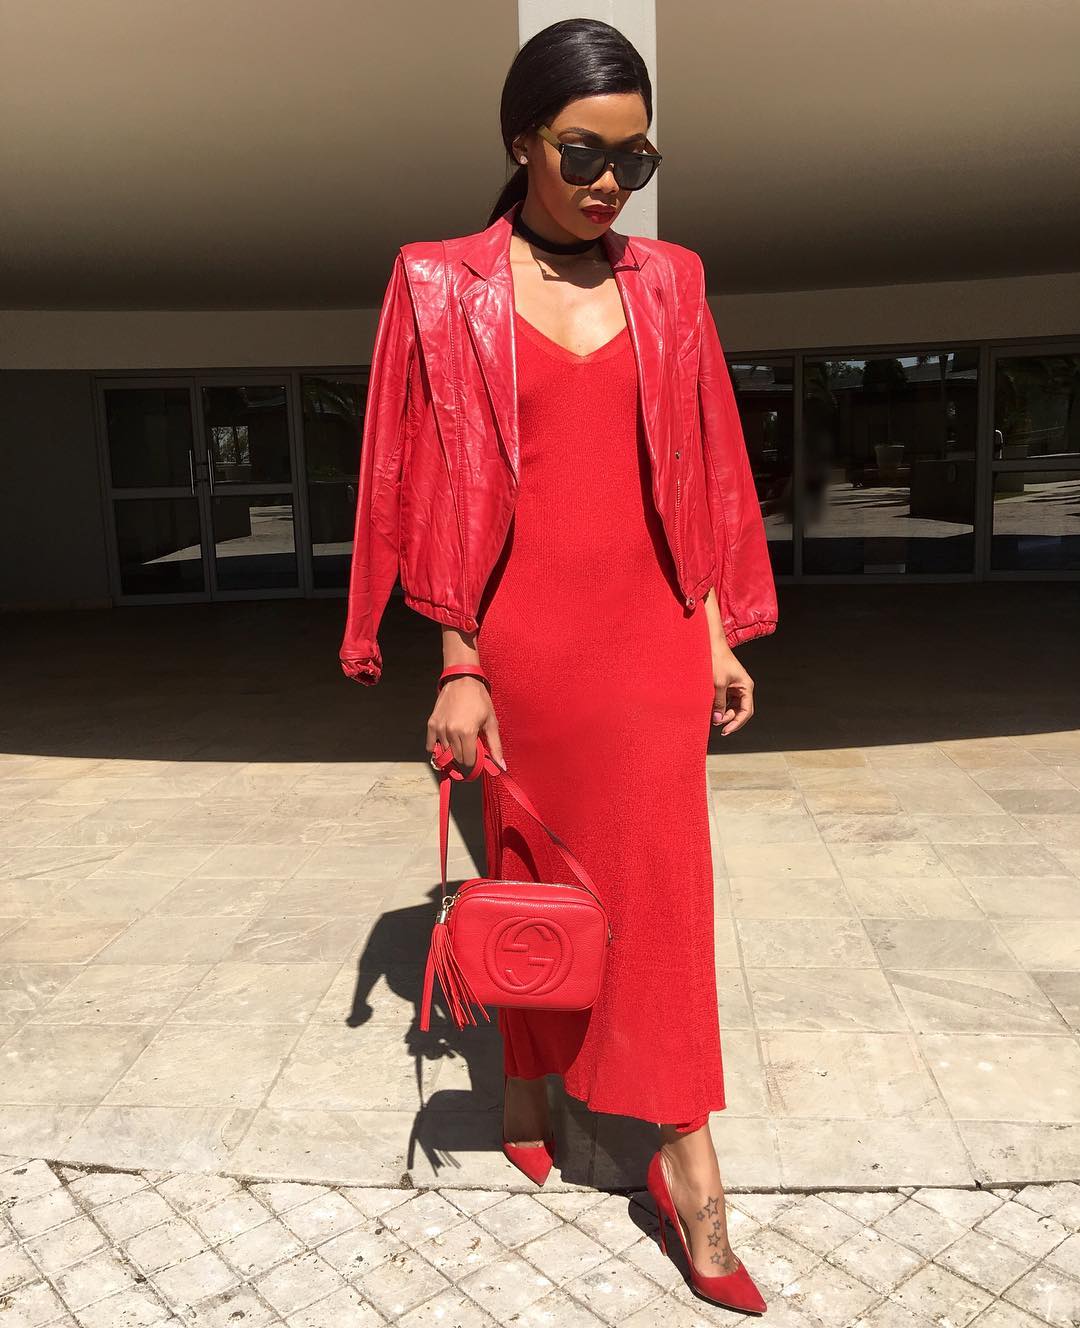 how-to-wear-red-for-festive-holiday-holiday-fashionpolicenigeria-2